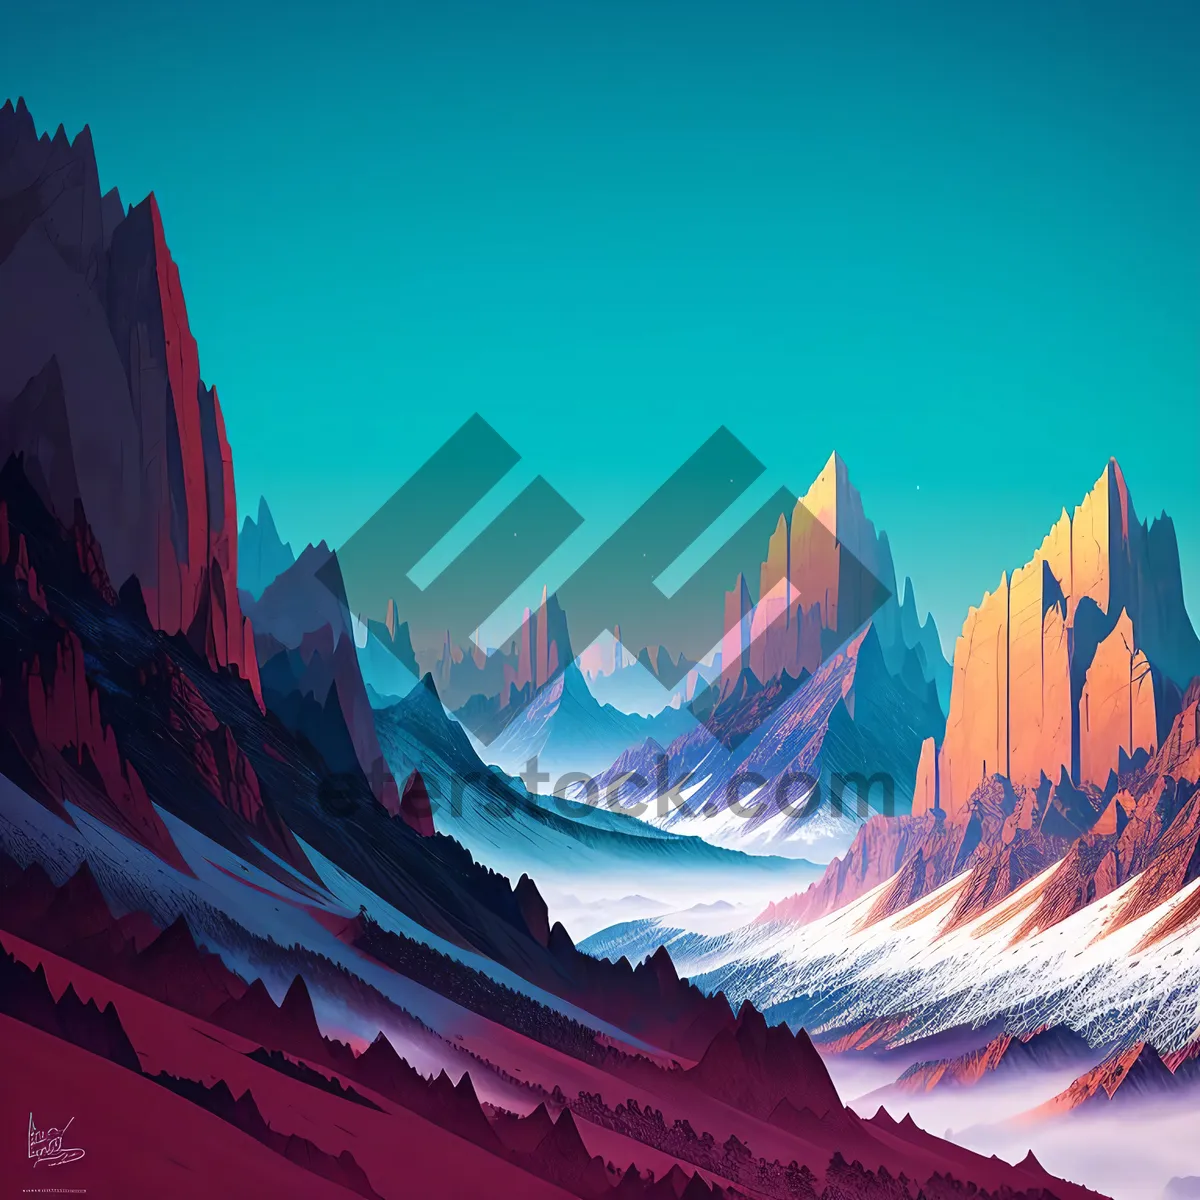 Picture of Glacial Majesty: A Digital Mountain Landscape Painting with Sky